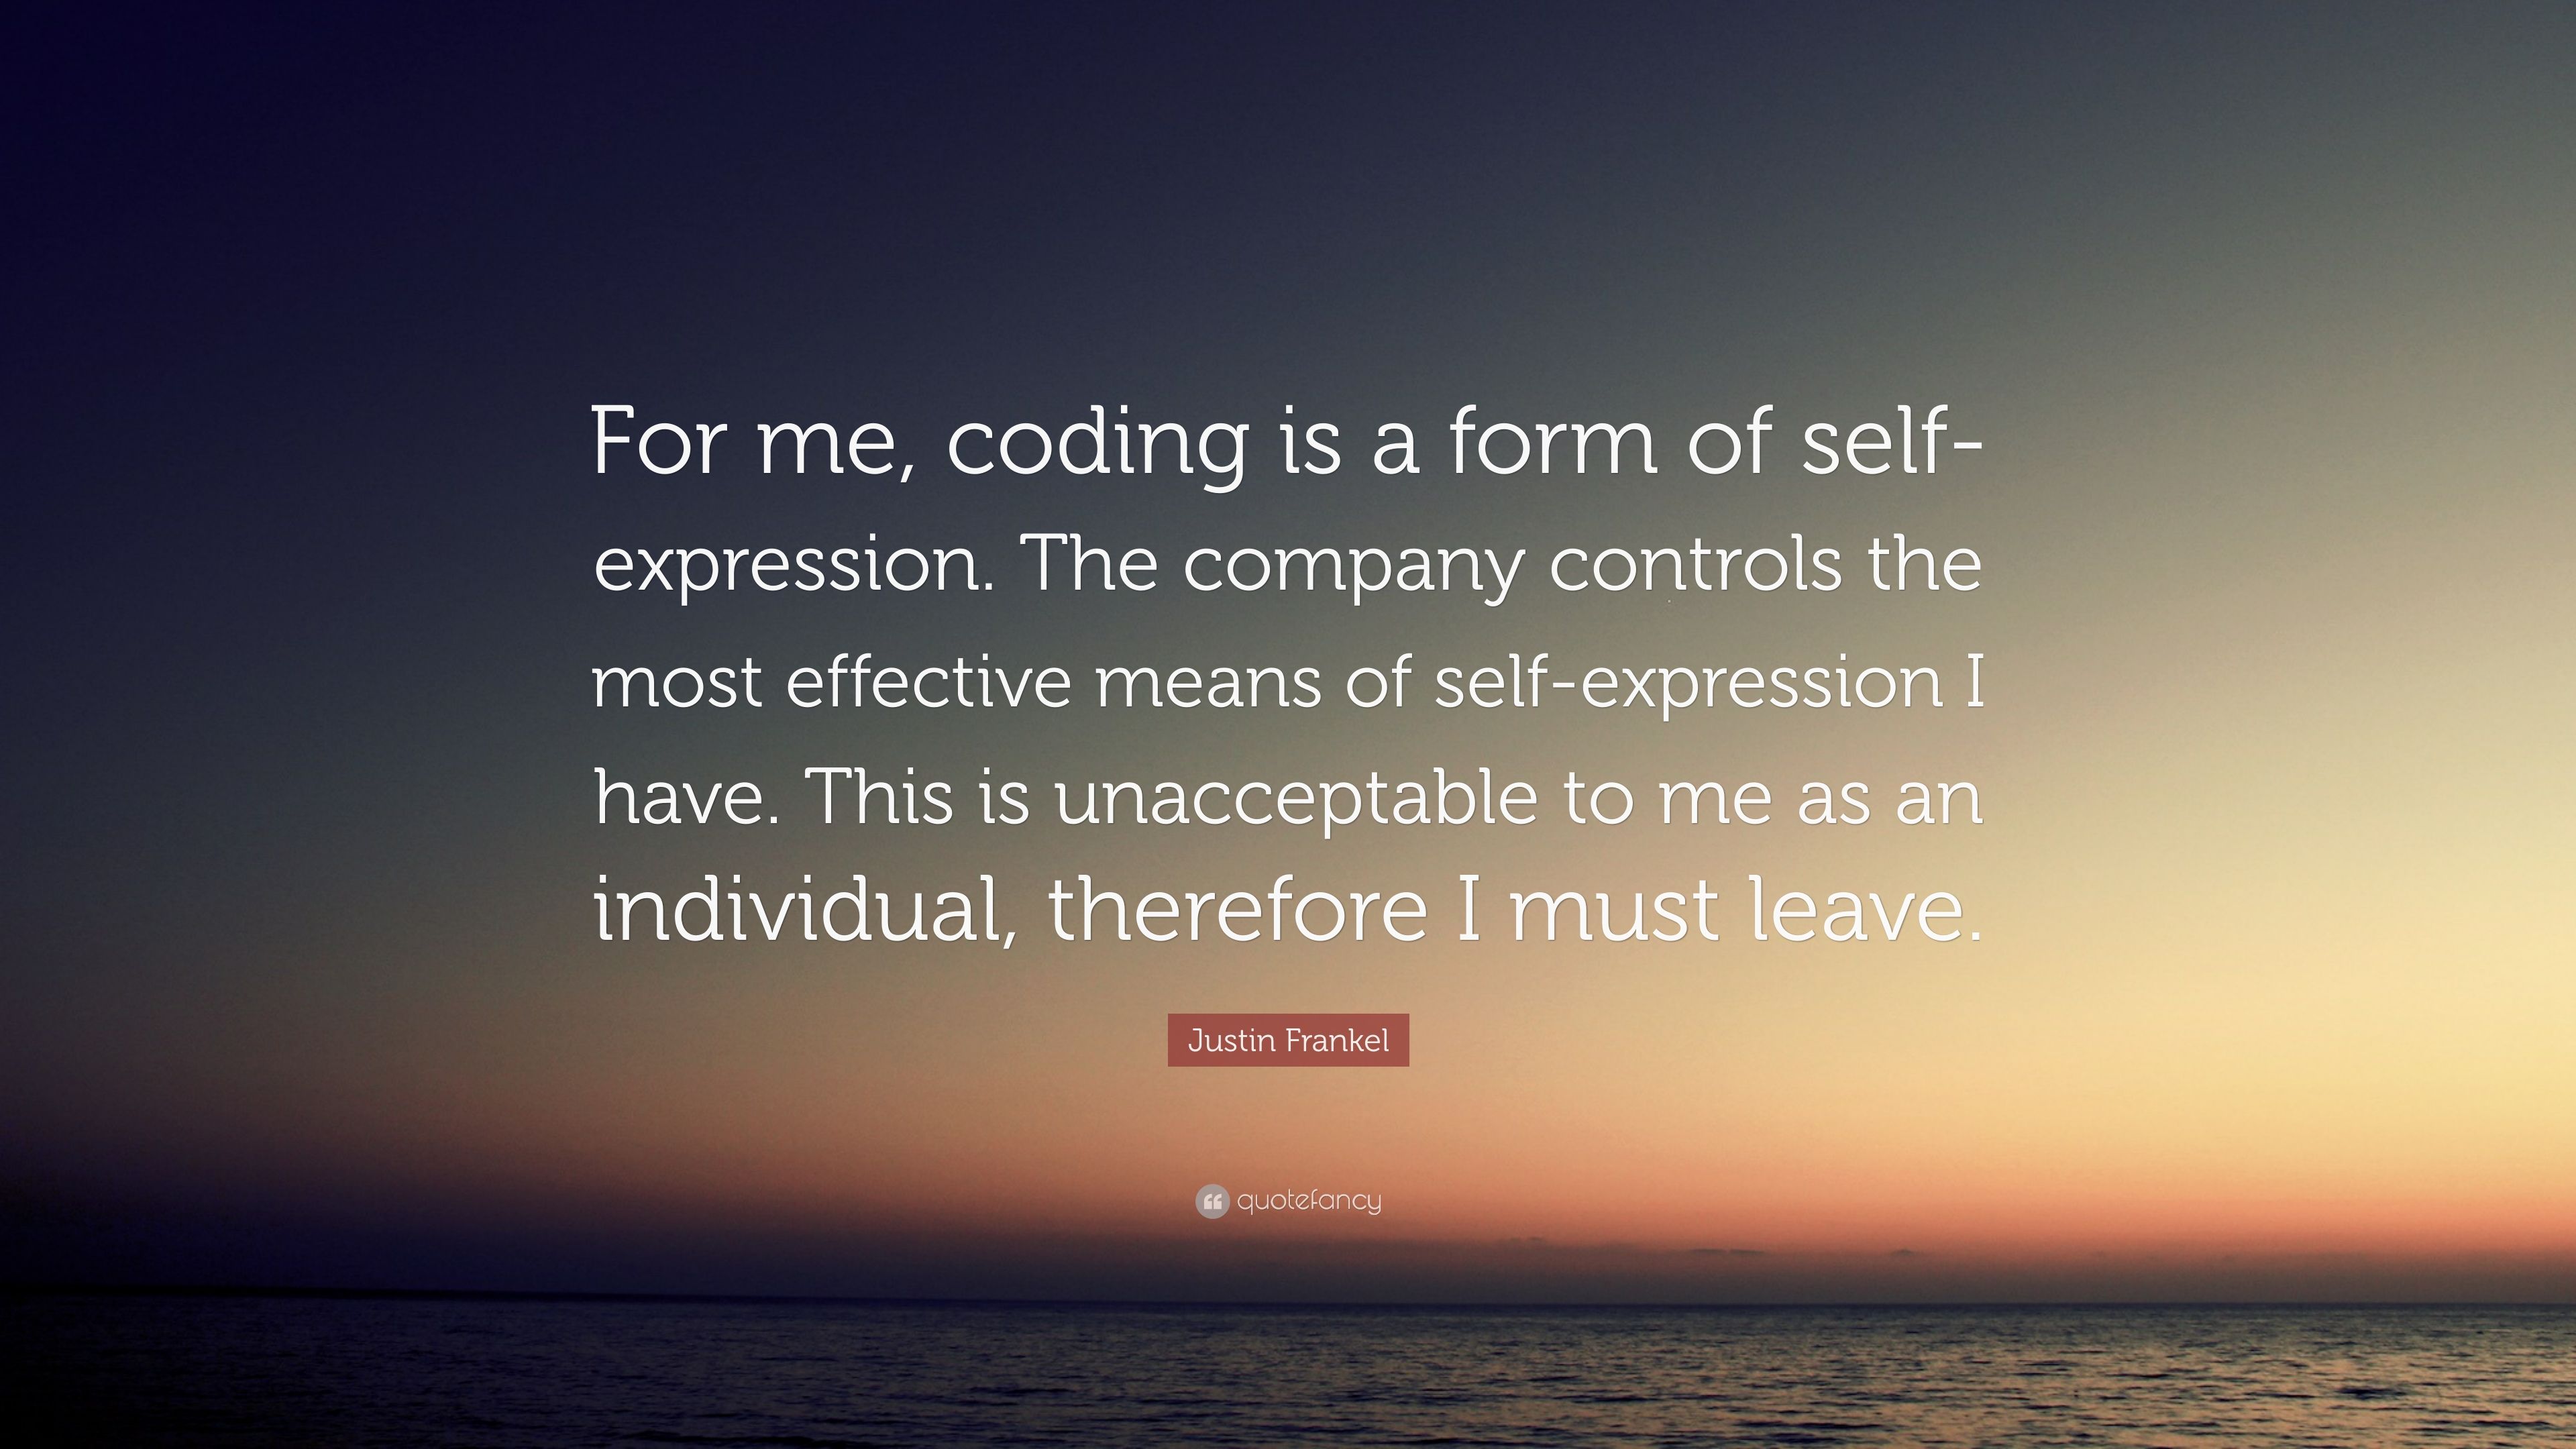 Justin frankel quote âfor me coding is a form of self